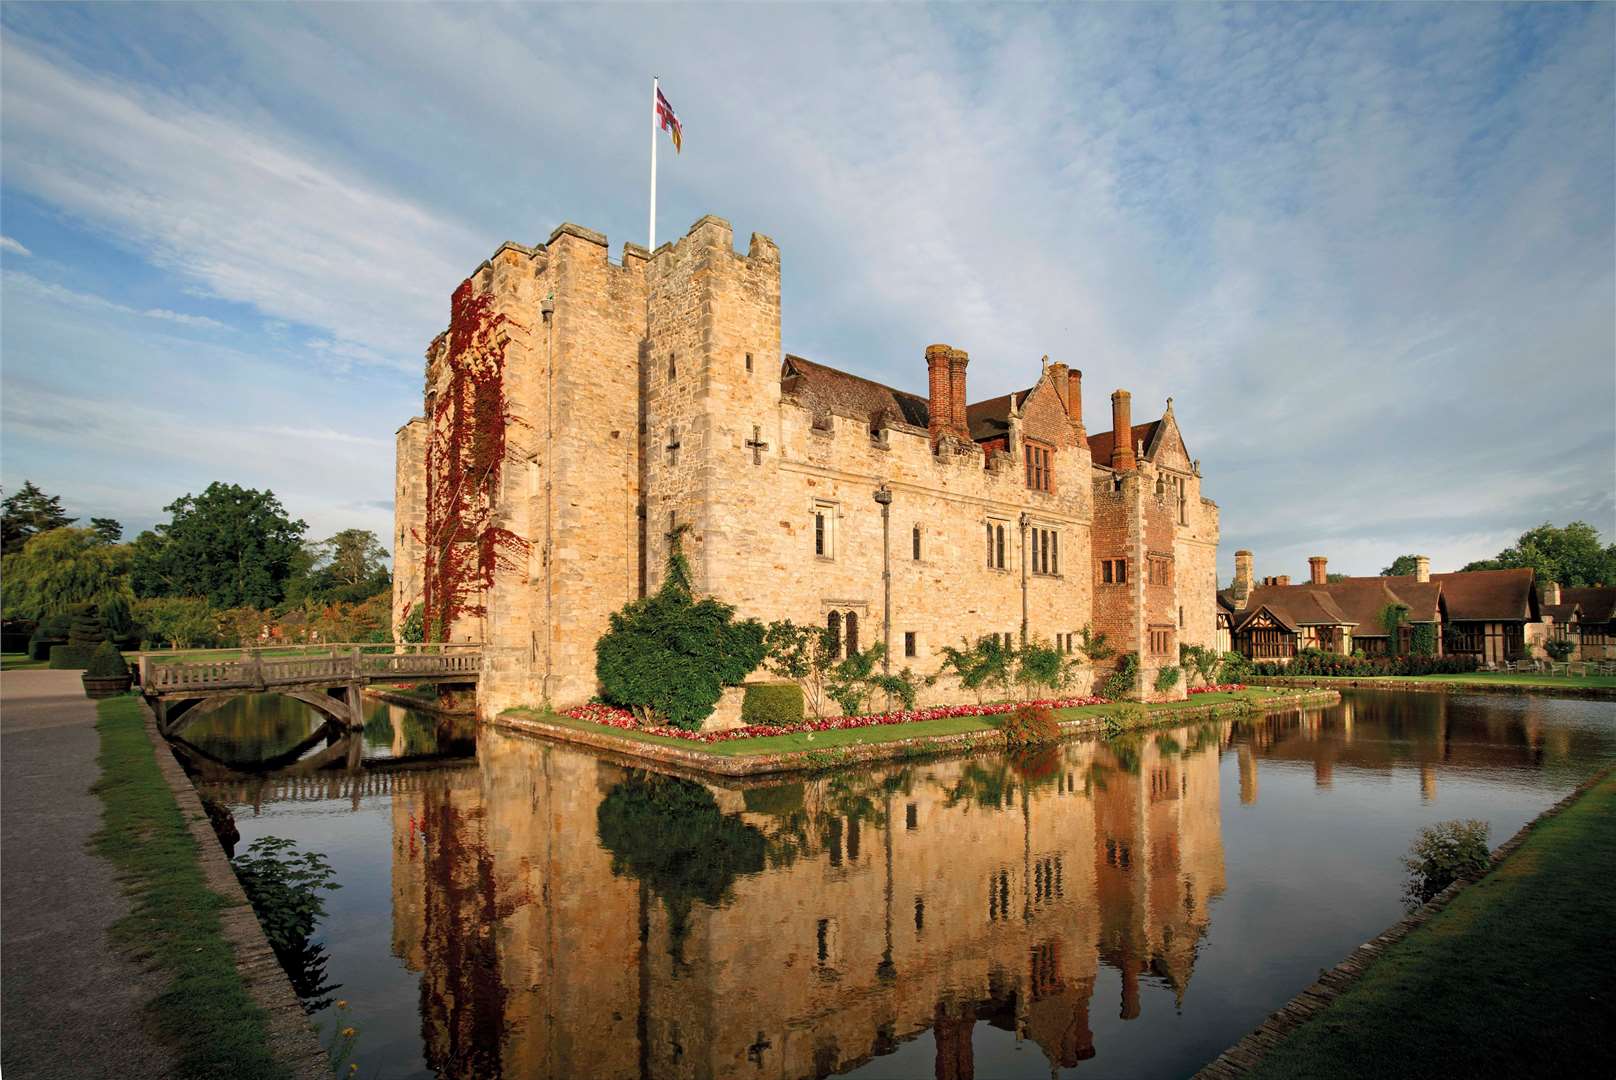 Hever Castle will remain closed from December 2 but the gardens will be open